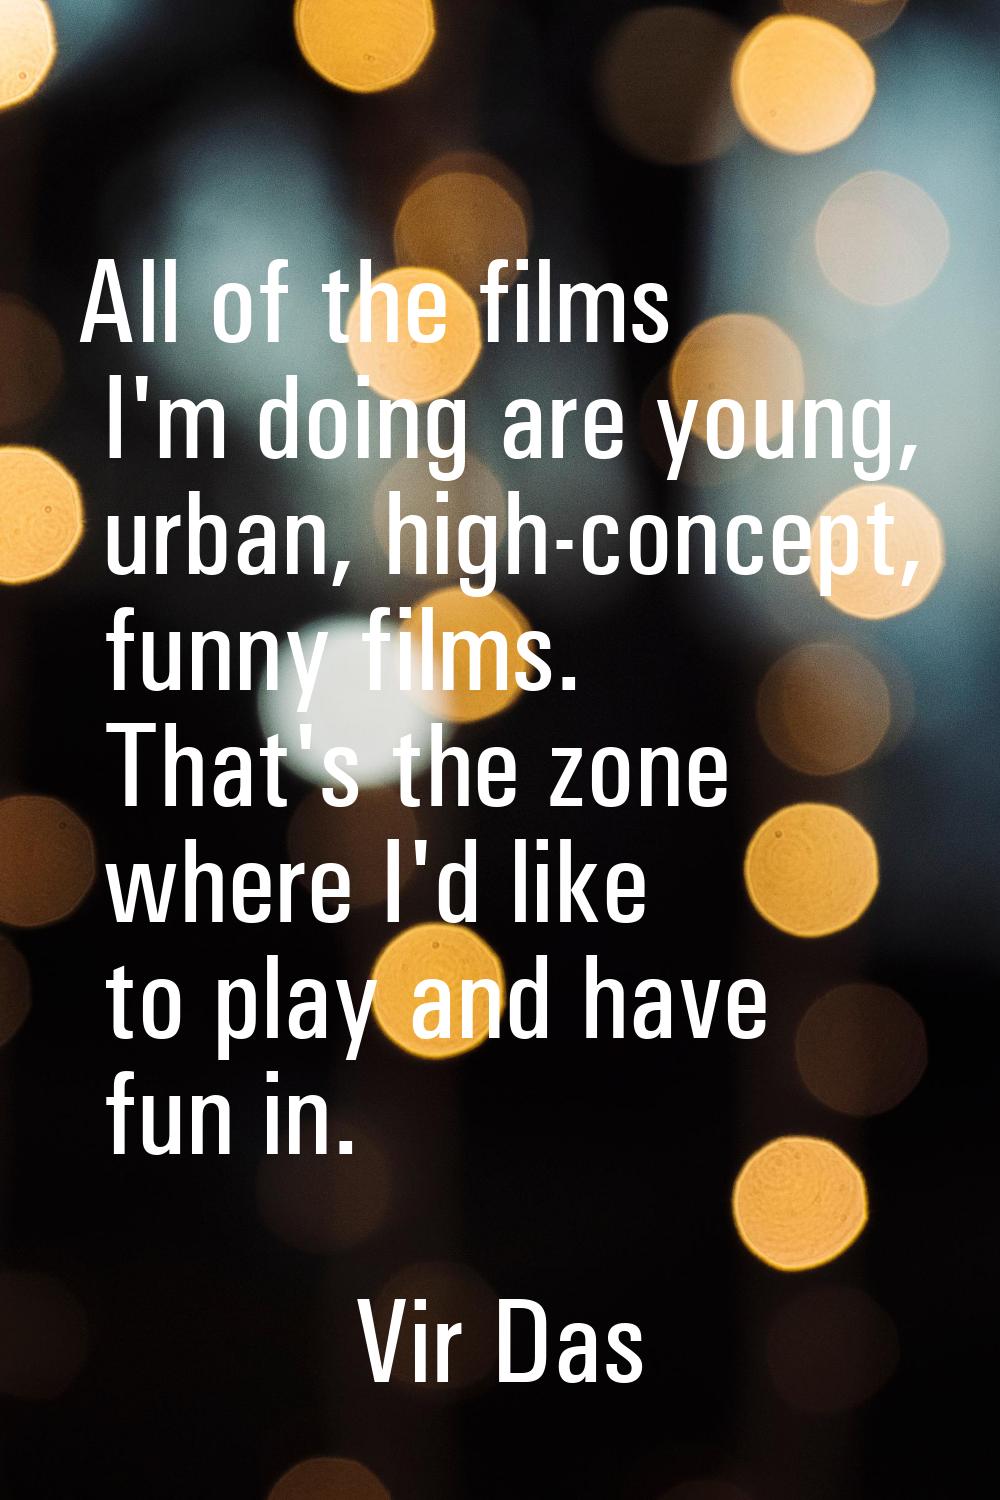 All of the films I'm doing are young, urban, high-concept, funny films. That's the zone where I'd l